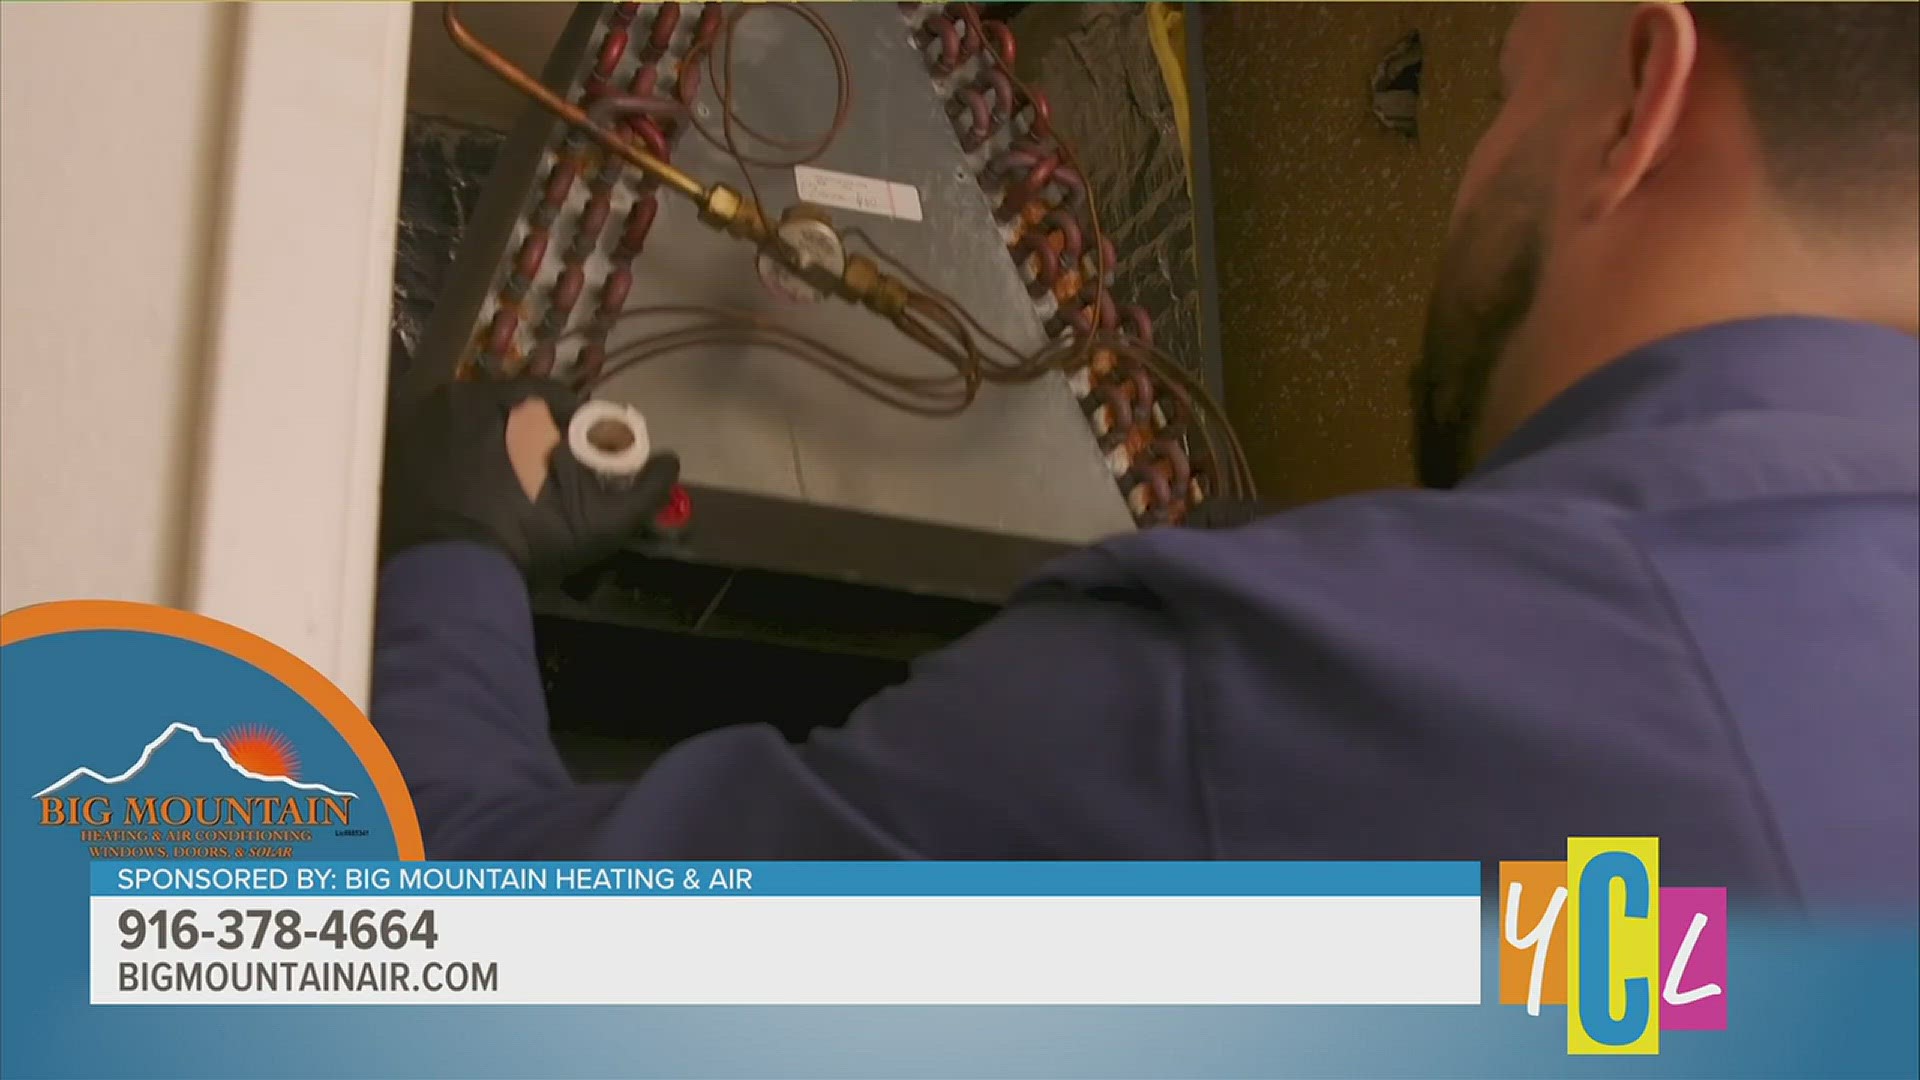 With unpredictable weather which has included rain one day and sunny skies the next, prep your HVAC unit! This segment is paid by Big Mountain Heating & Air.